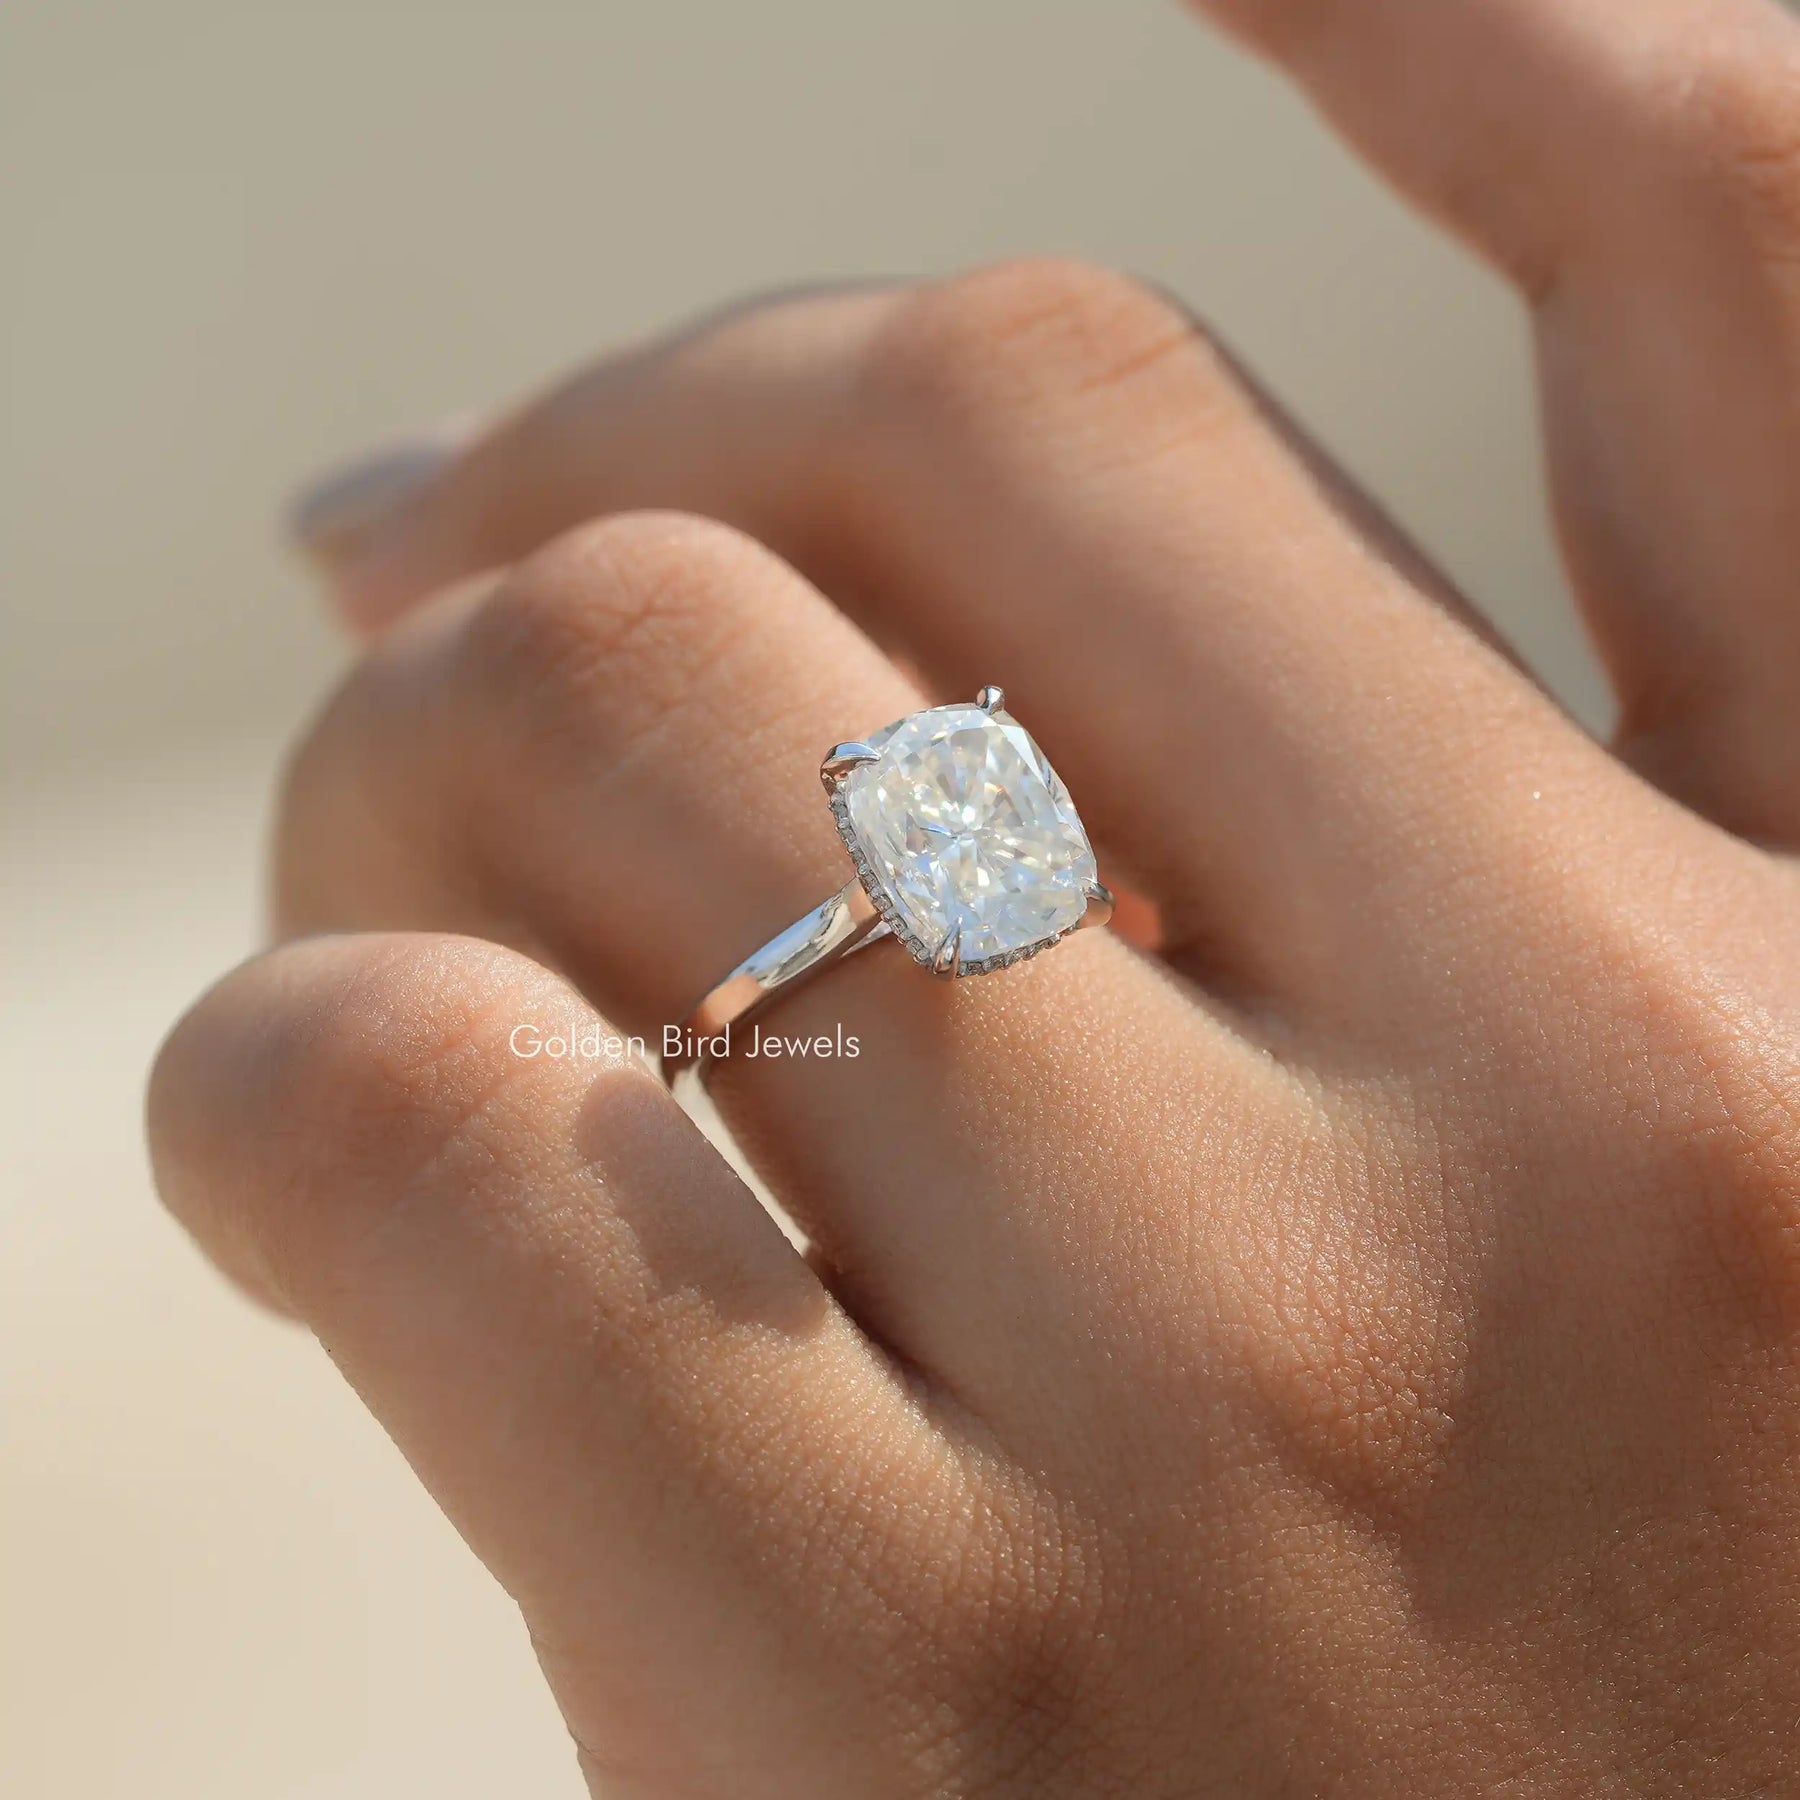 [Elongated Cushion Cut Moissanite Engagement Ring Made In 18K White Gold]-[Golden Bird Jewels]